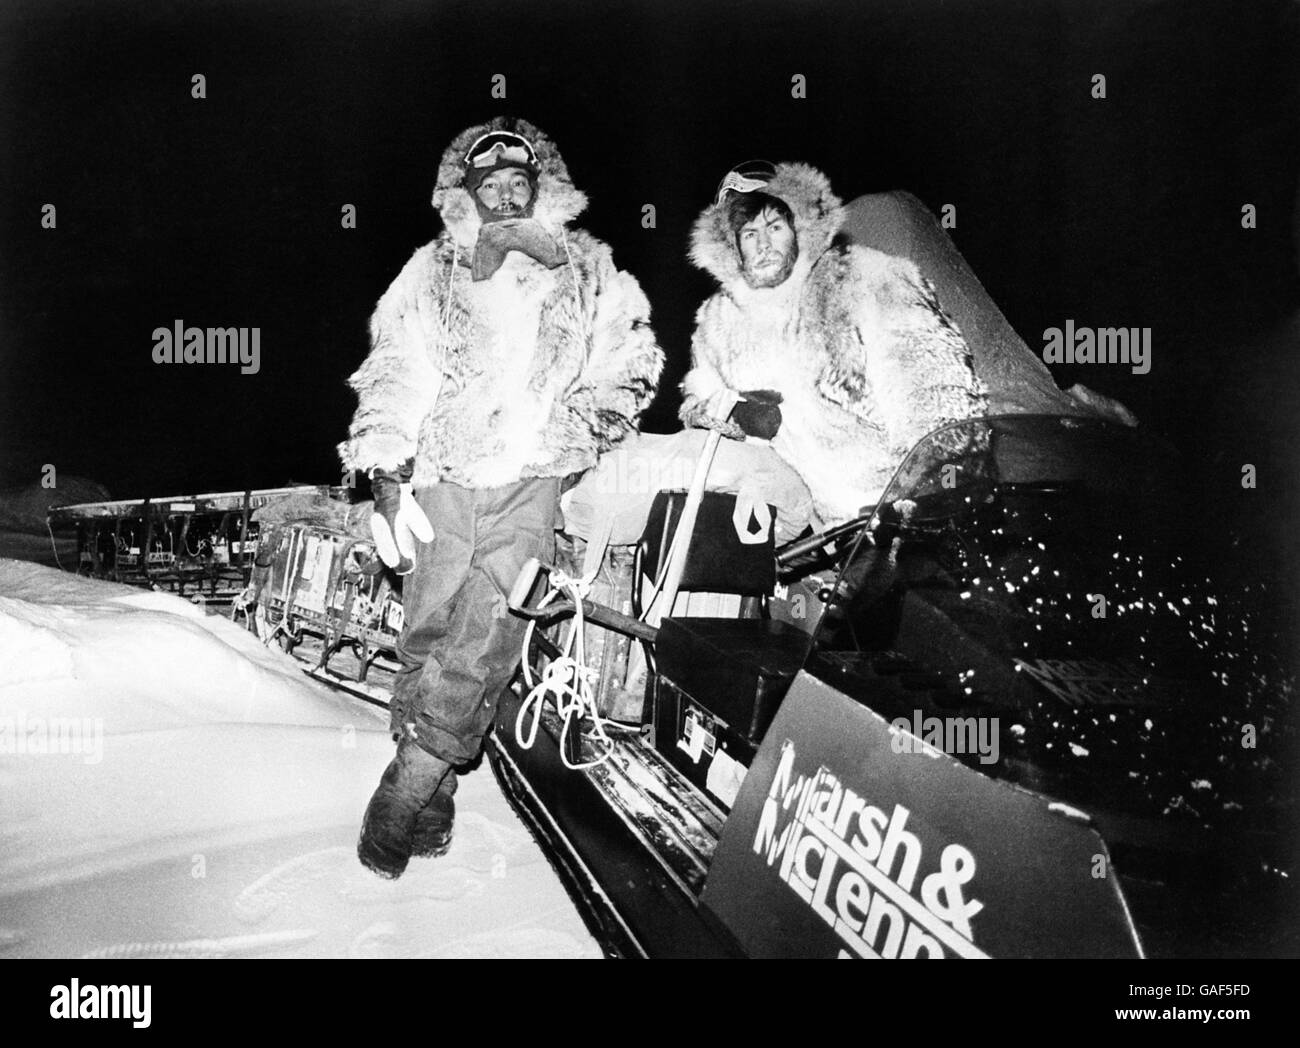 Charles Burton, 39 (left) and Sir Ranulph Fiennes, 37 in the Arctic winter darkness. They are part of the British Transglobe Expedition which is in serious danger of being forced back just a short distance from the North Pole, because of a fire in it's support base at Alert Base, Northern Canada. Leader Sir Ranulph, and Burton are now stranded in temperatures of minus 40c without transport, 450 miles from the Pole with just a weeks supply of food and water. Stock Photo